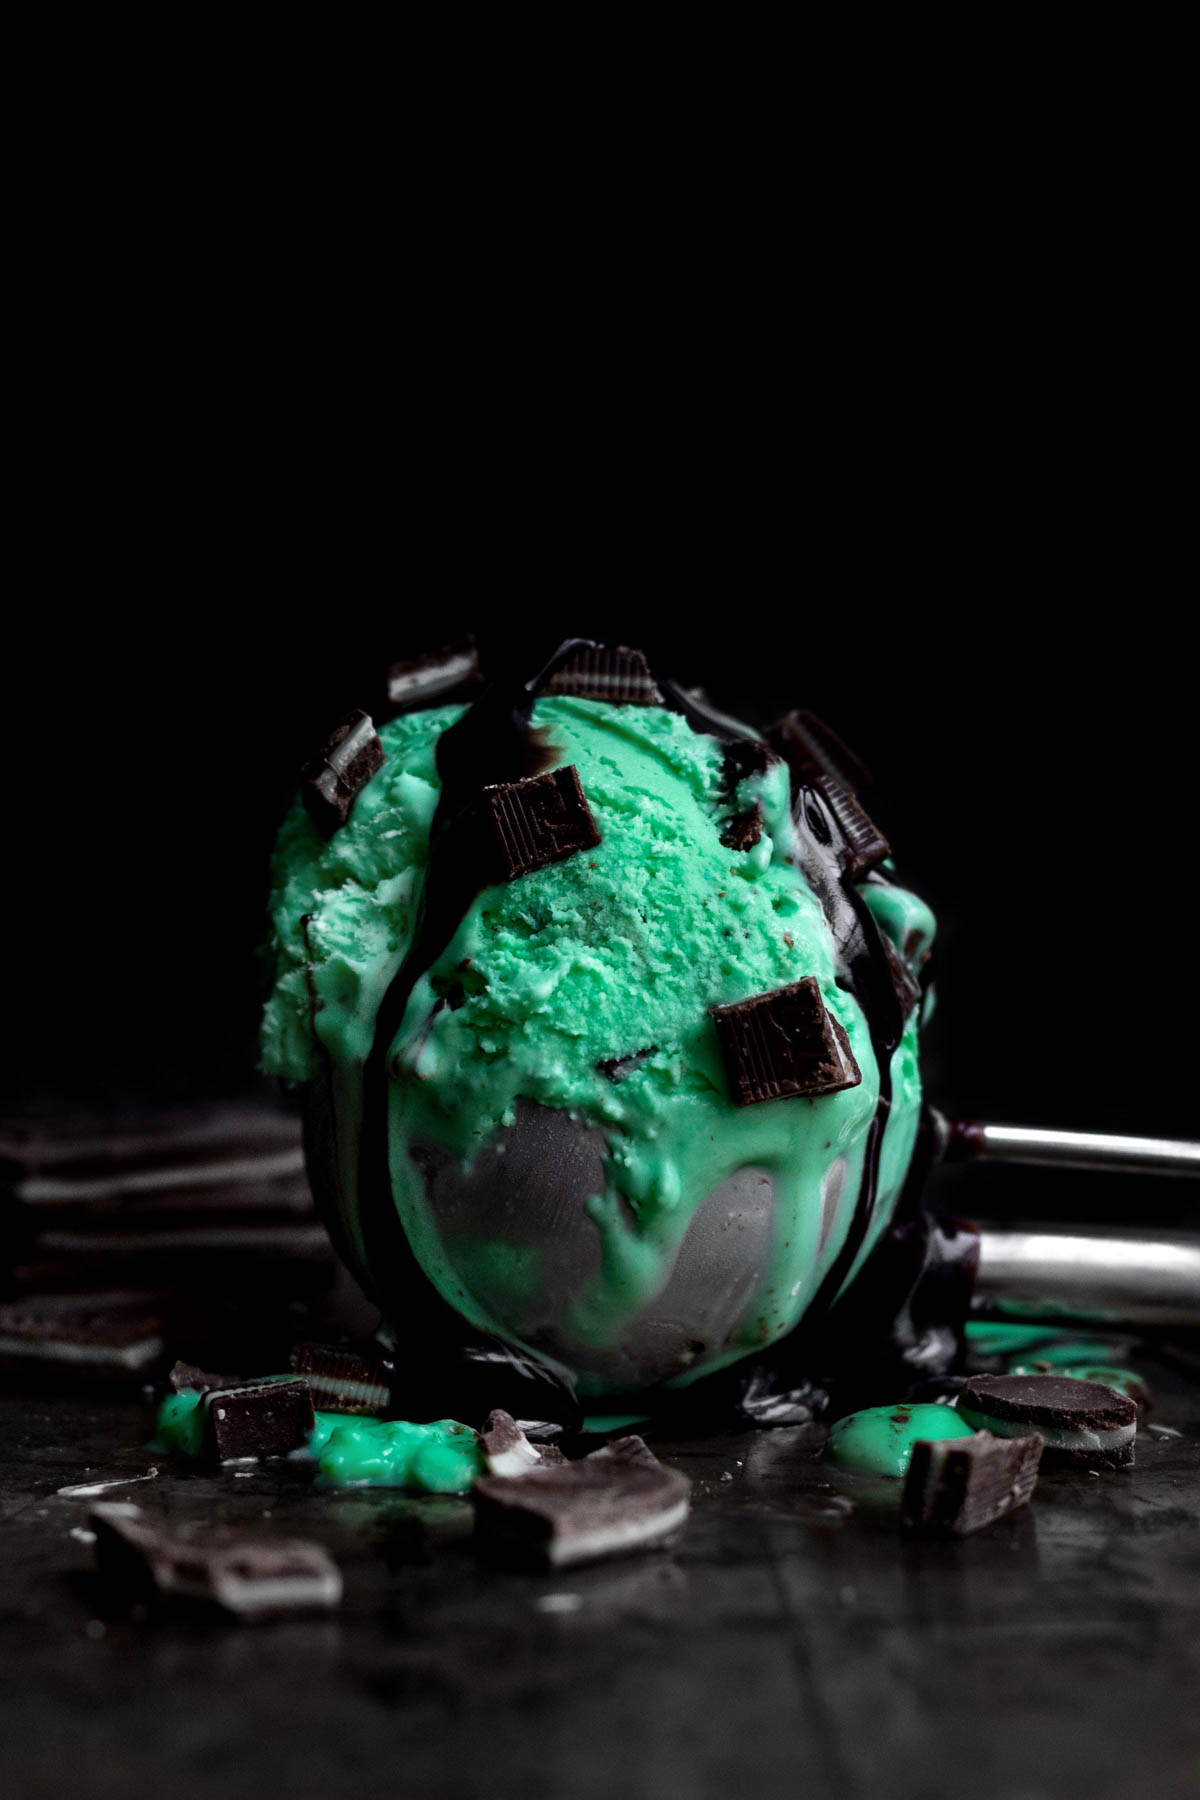 Bright green Mint Ice Cream in a scoop with dark mint chunks.